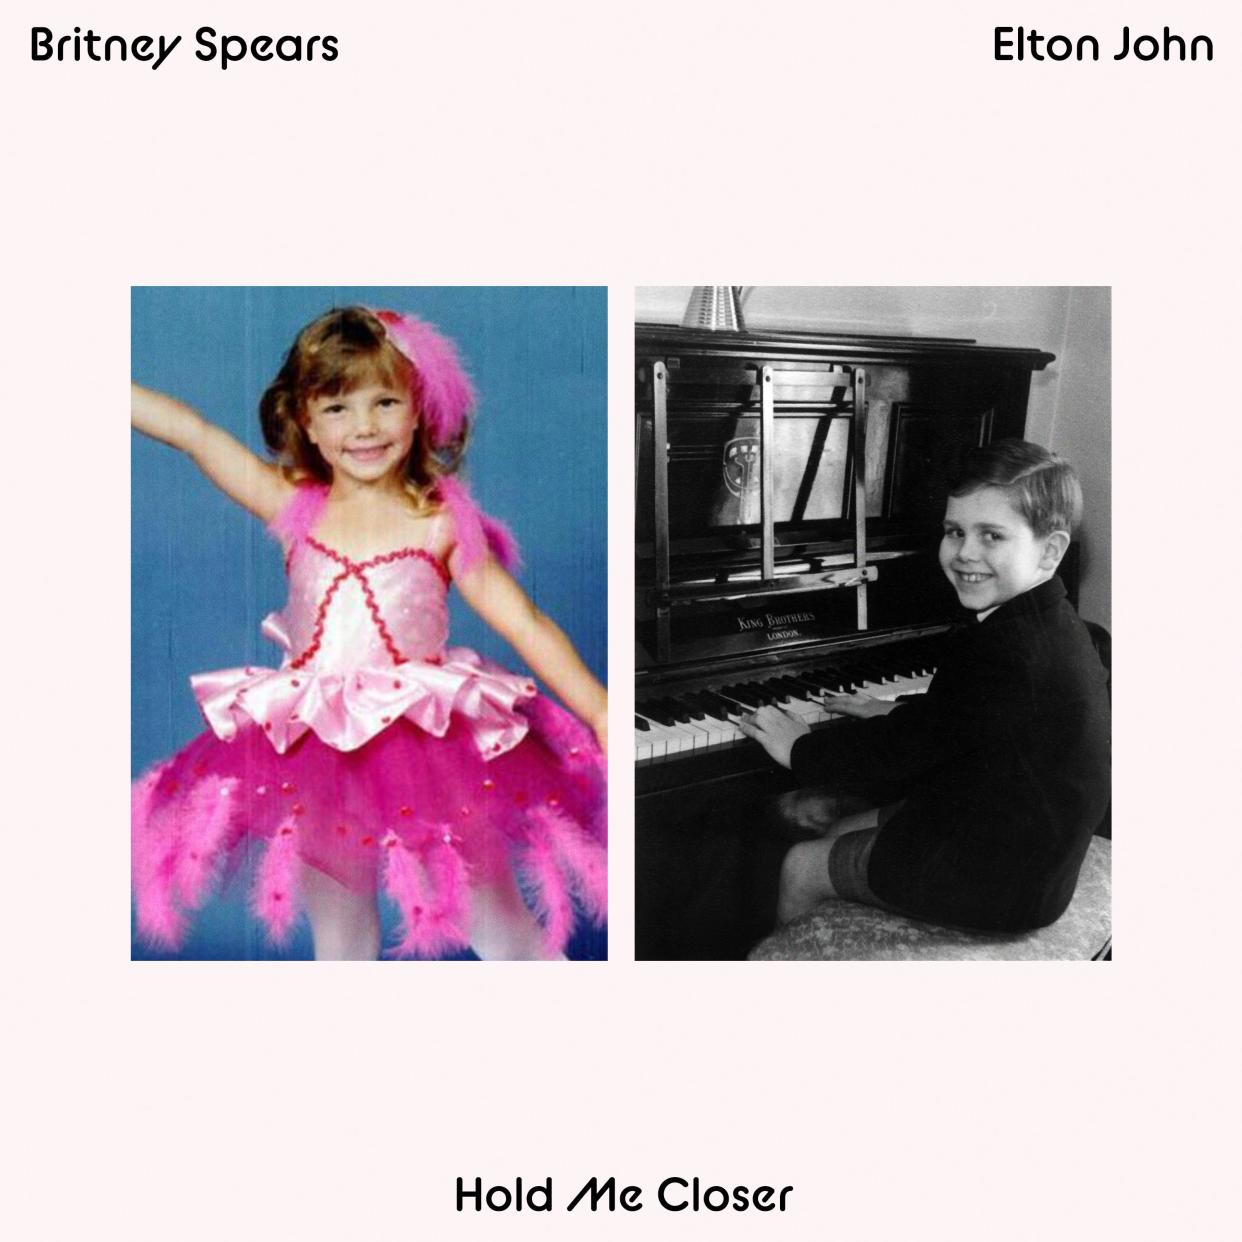 Britney Spears and Elton John are teaming up for a new single which will mark Spears' return to music after her 13-year conservatorship ended in November.